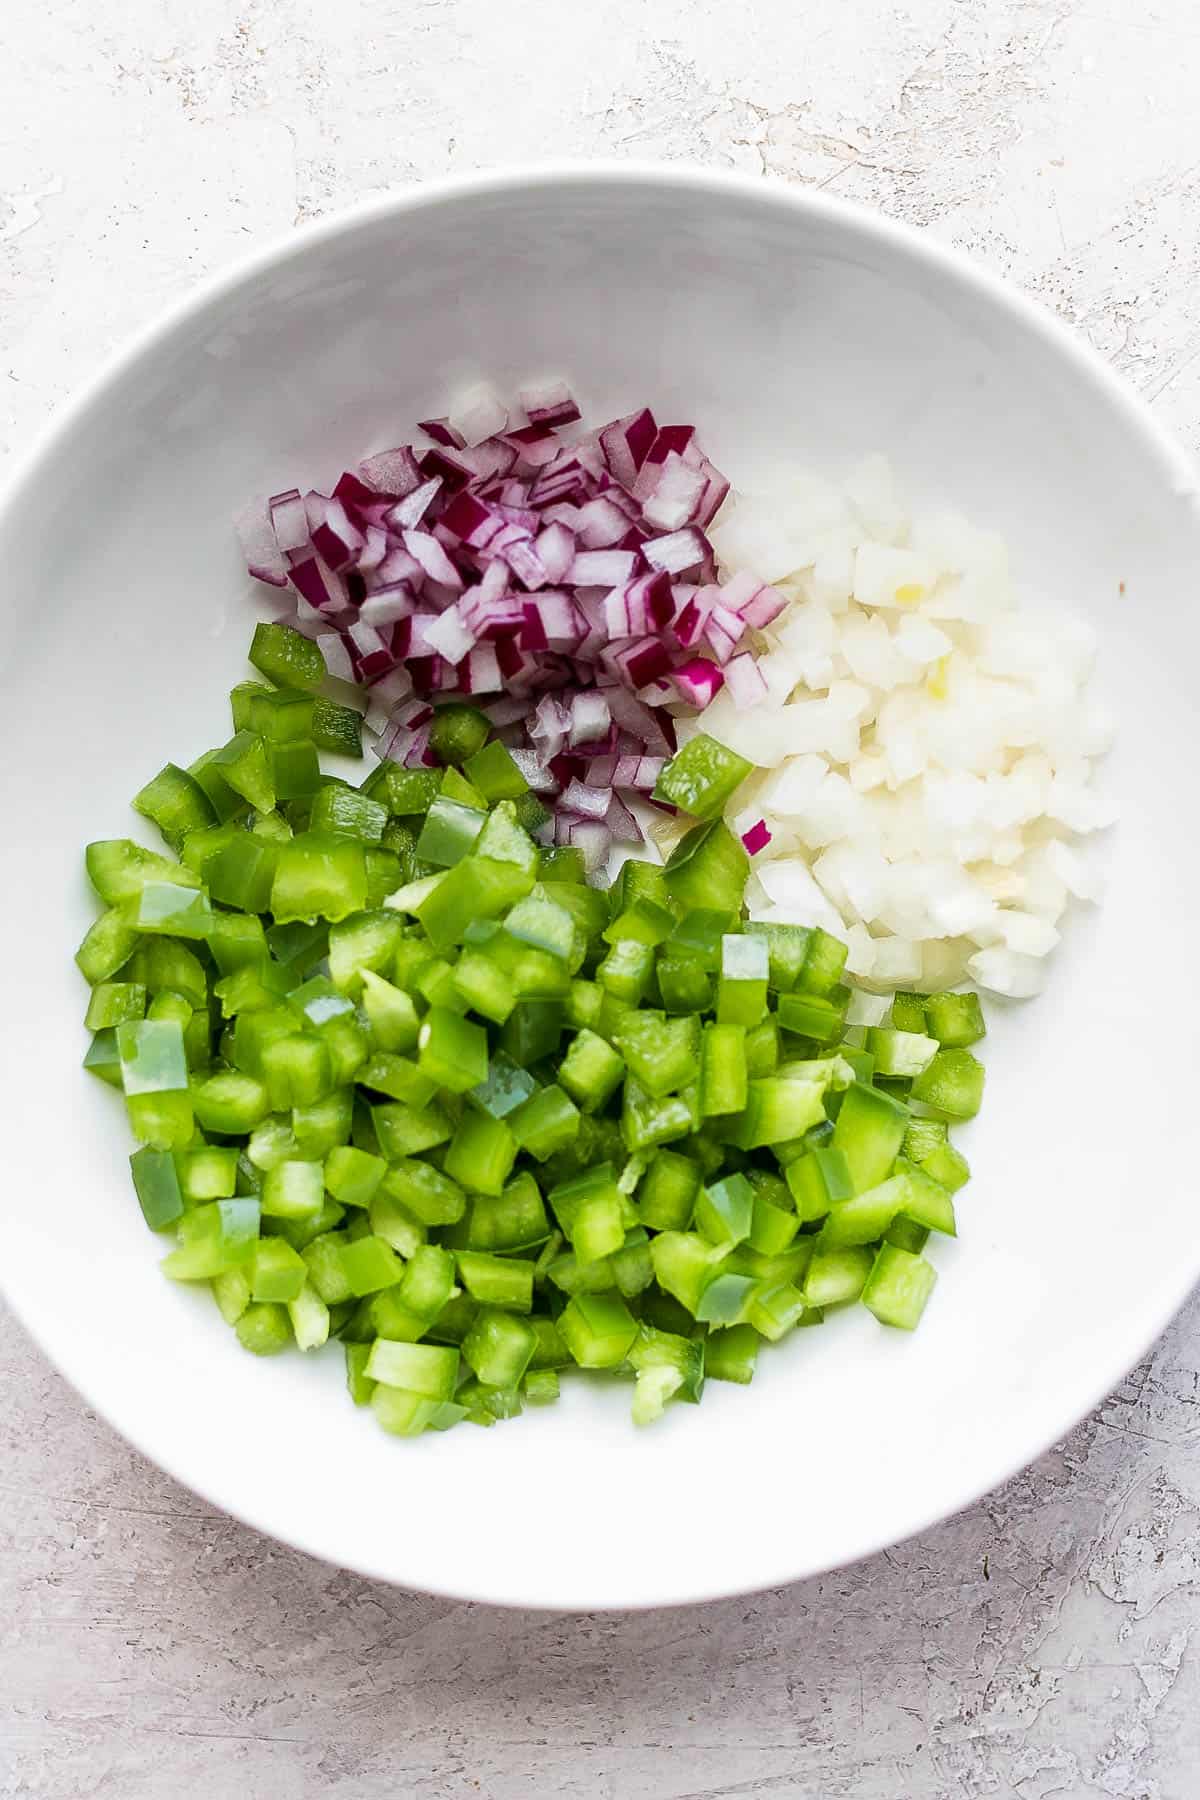 A bowl of chopped yellow onion, red onion, and green pepper.